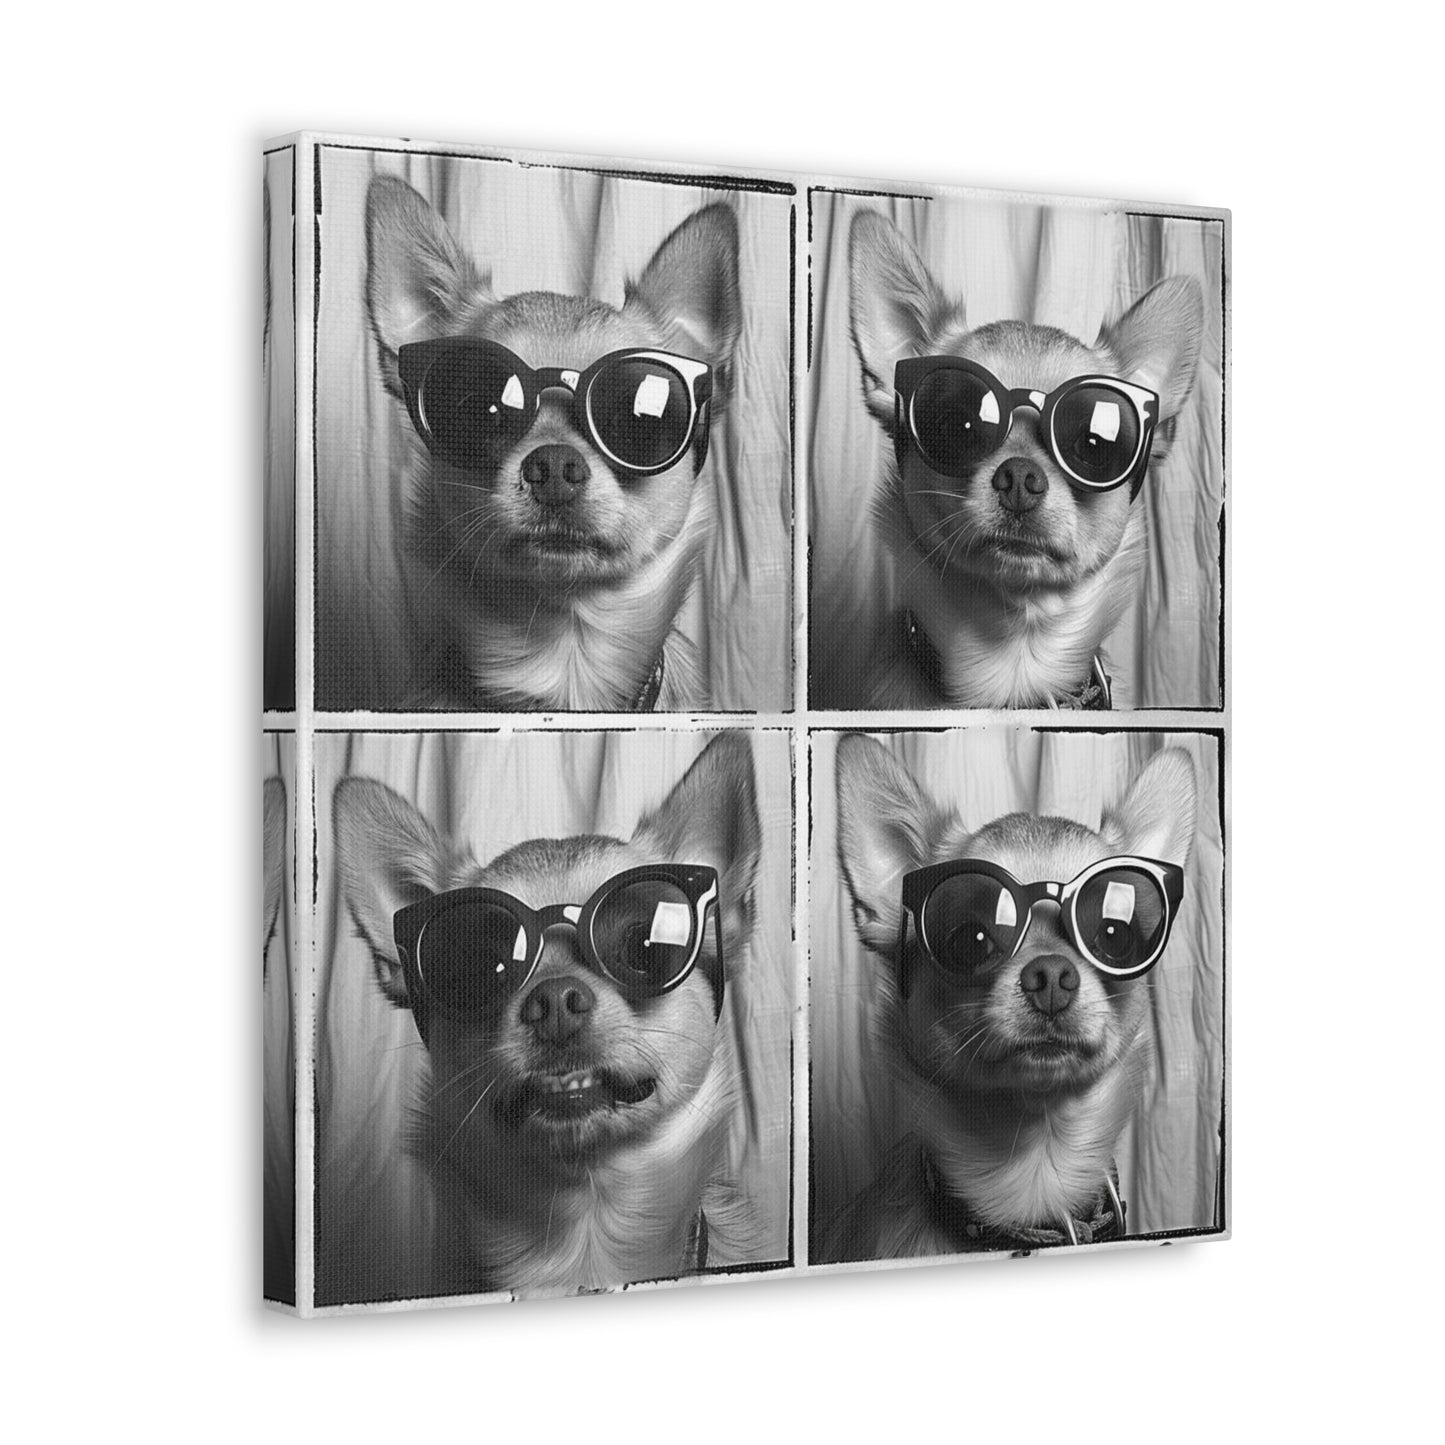 Chihuahua Photo Booth Canvas